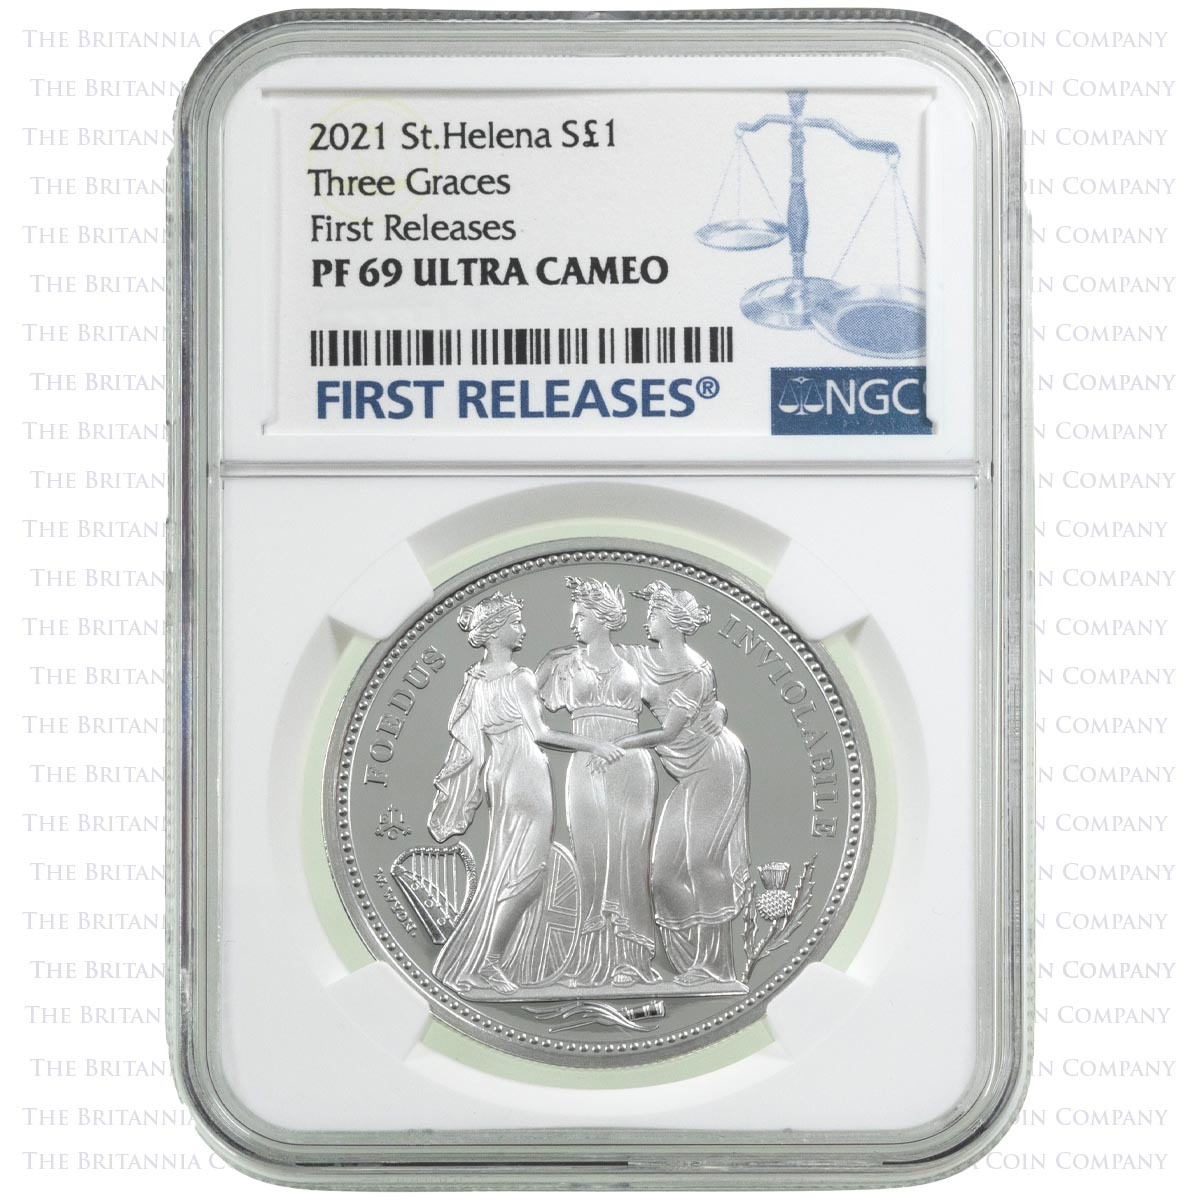 2021 Saint Helena Three Graces One Ounce Silver Proof Coin NGC Graded PF 69 Ultra Cameo First Releases Holder